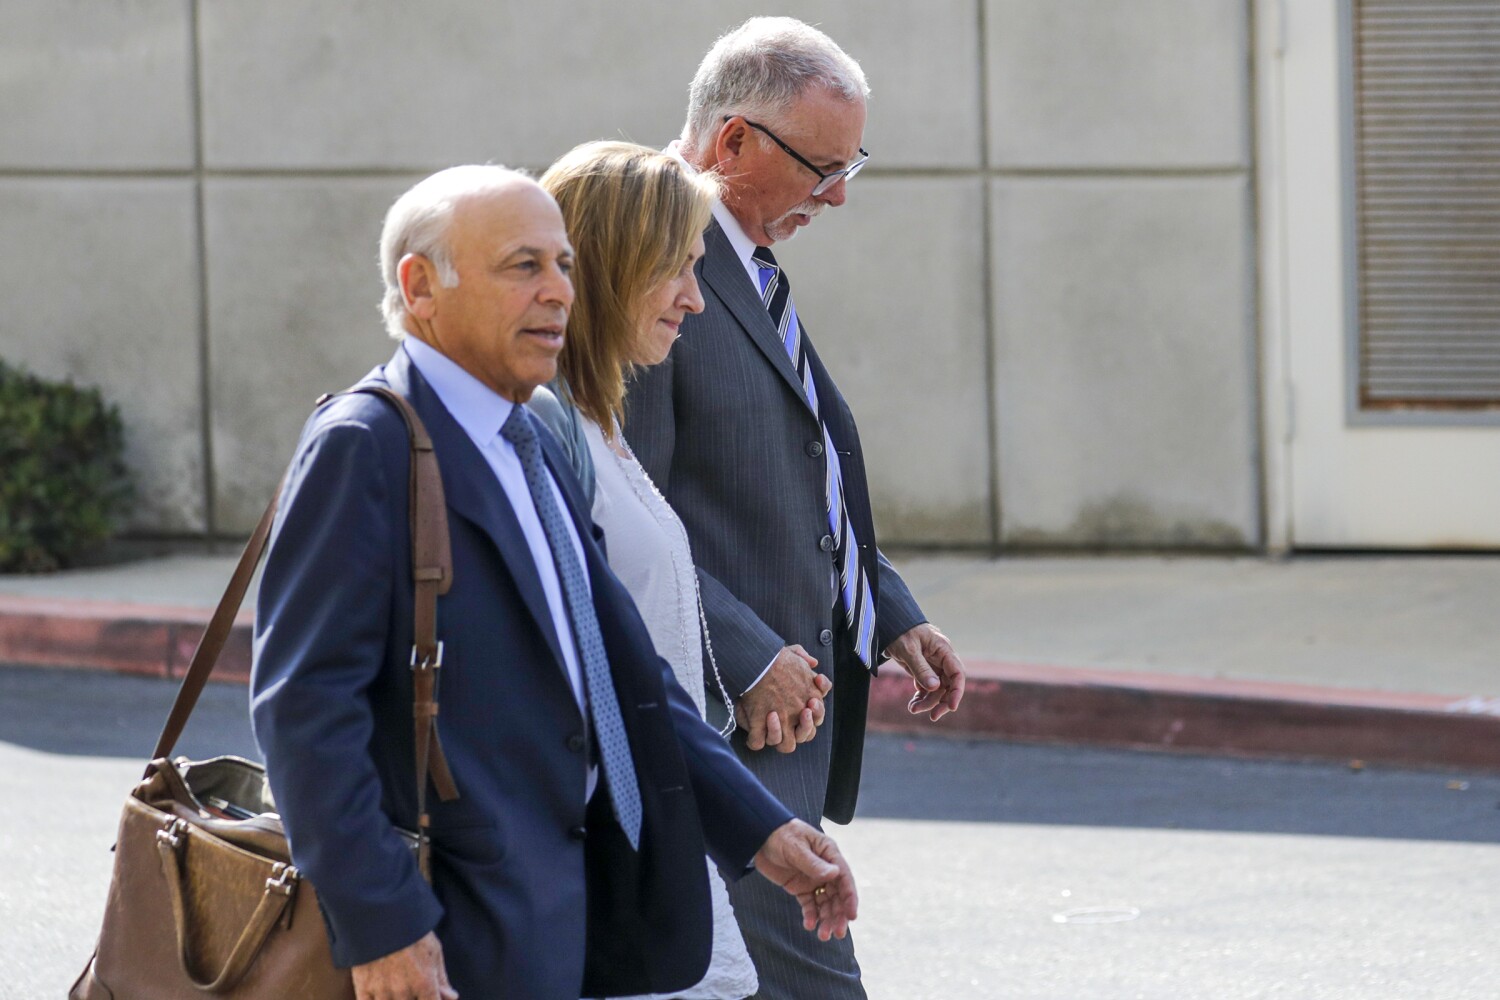 Former UCLA gynecologist faces additional charges of sexually abusing patients